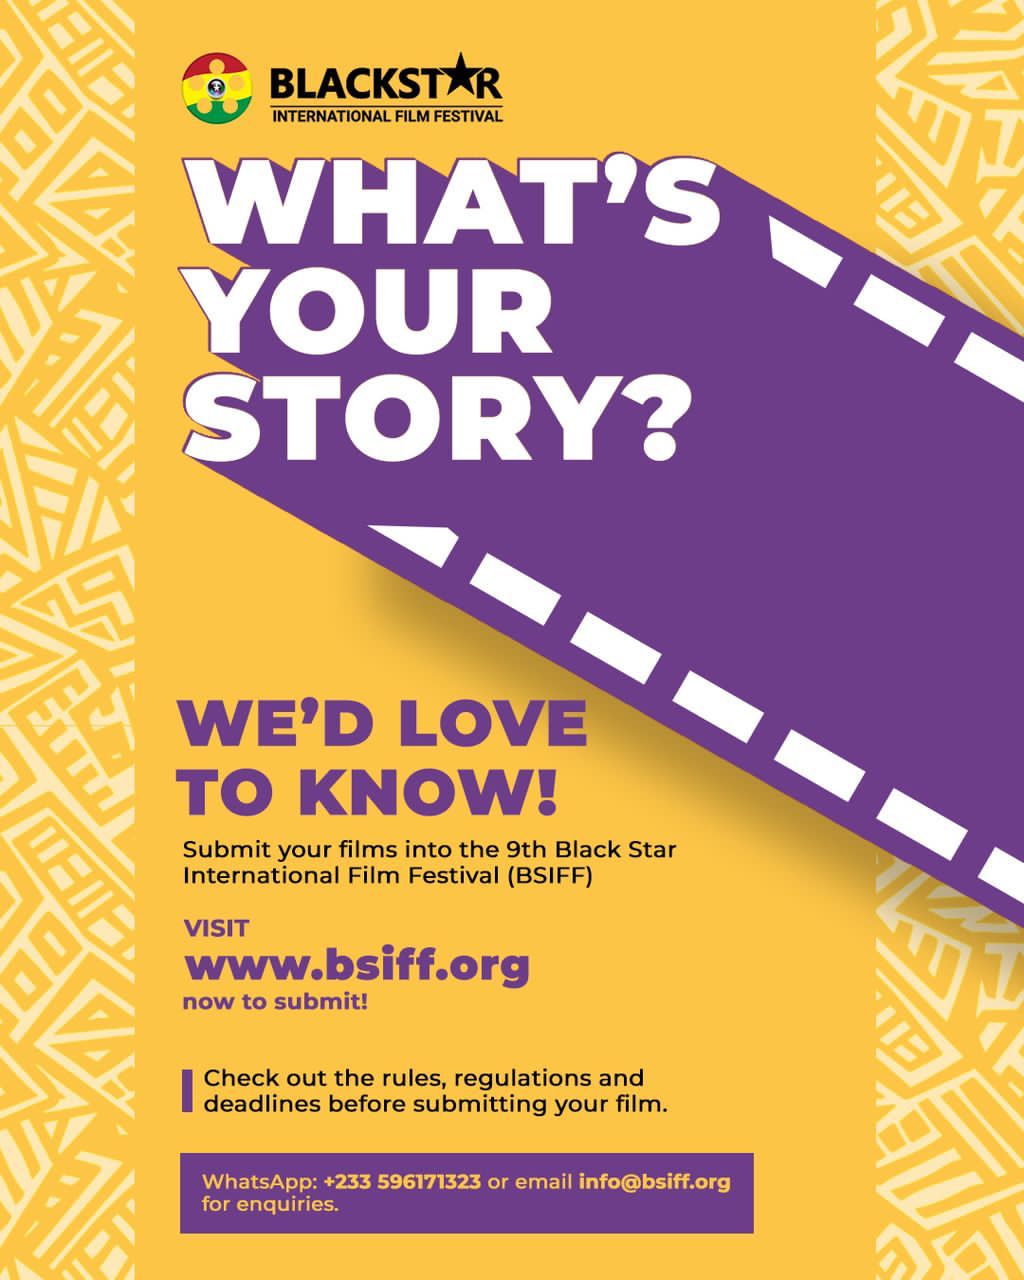 “Tell Your Story” at the 9th Black Star International Film Festival